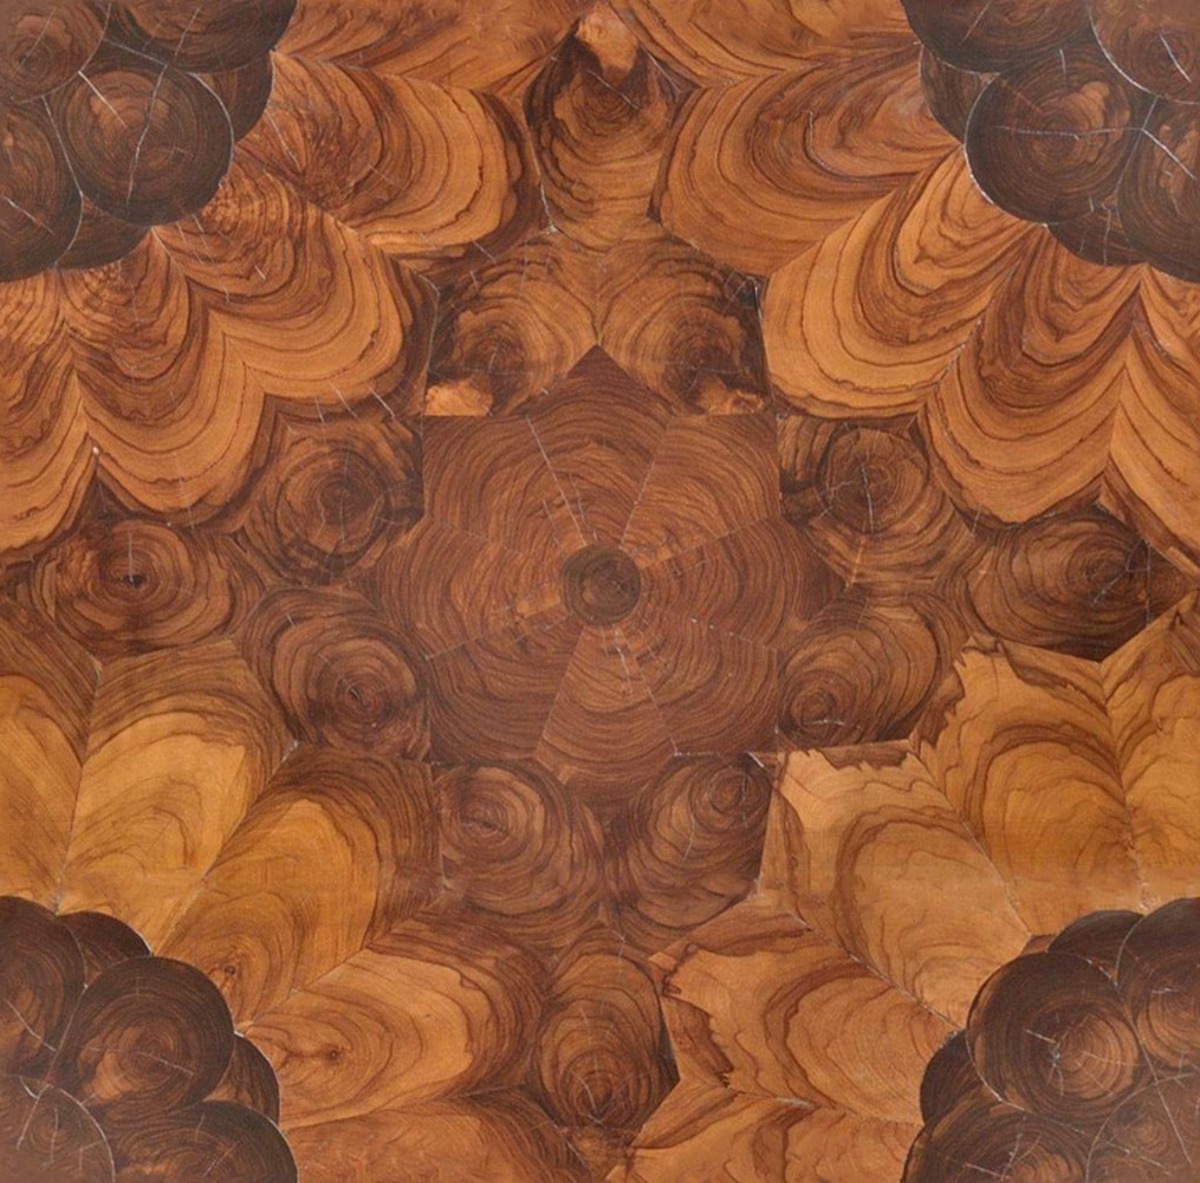 A seamless wood texture with olive wood rosette boards arranged in a None pattern